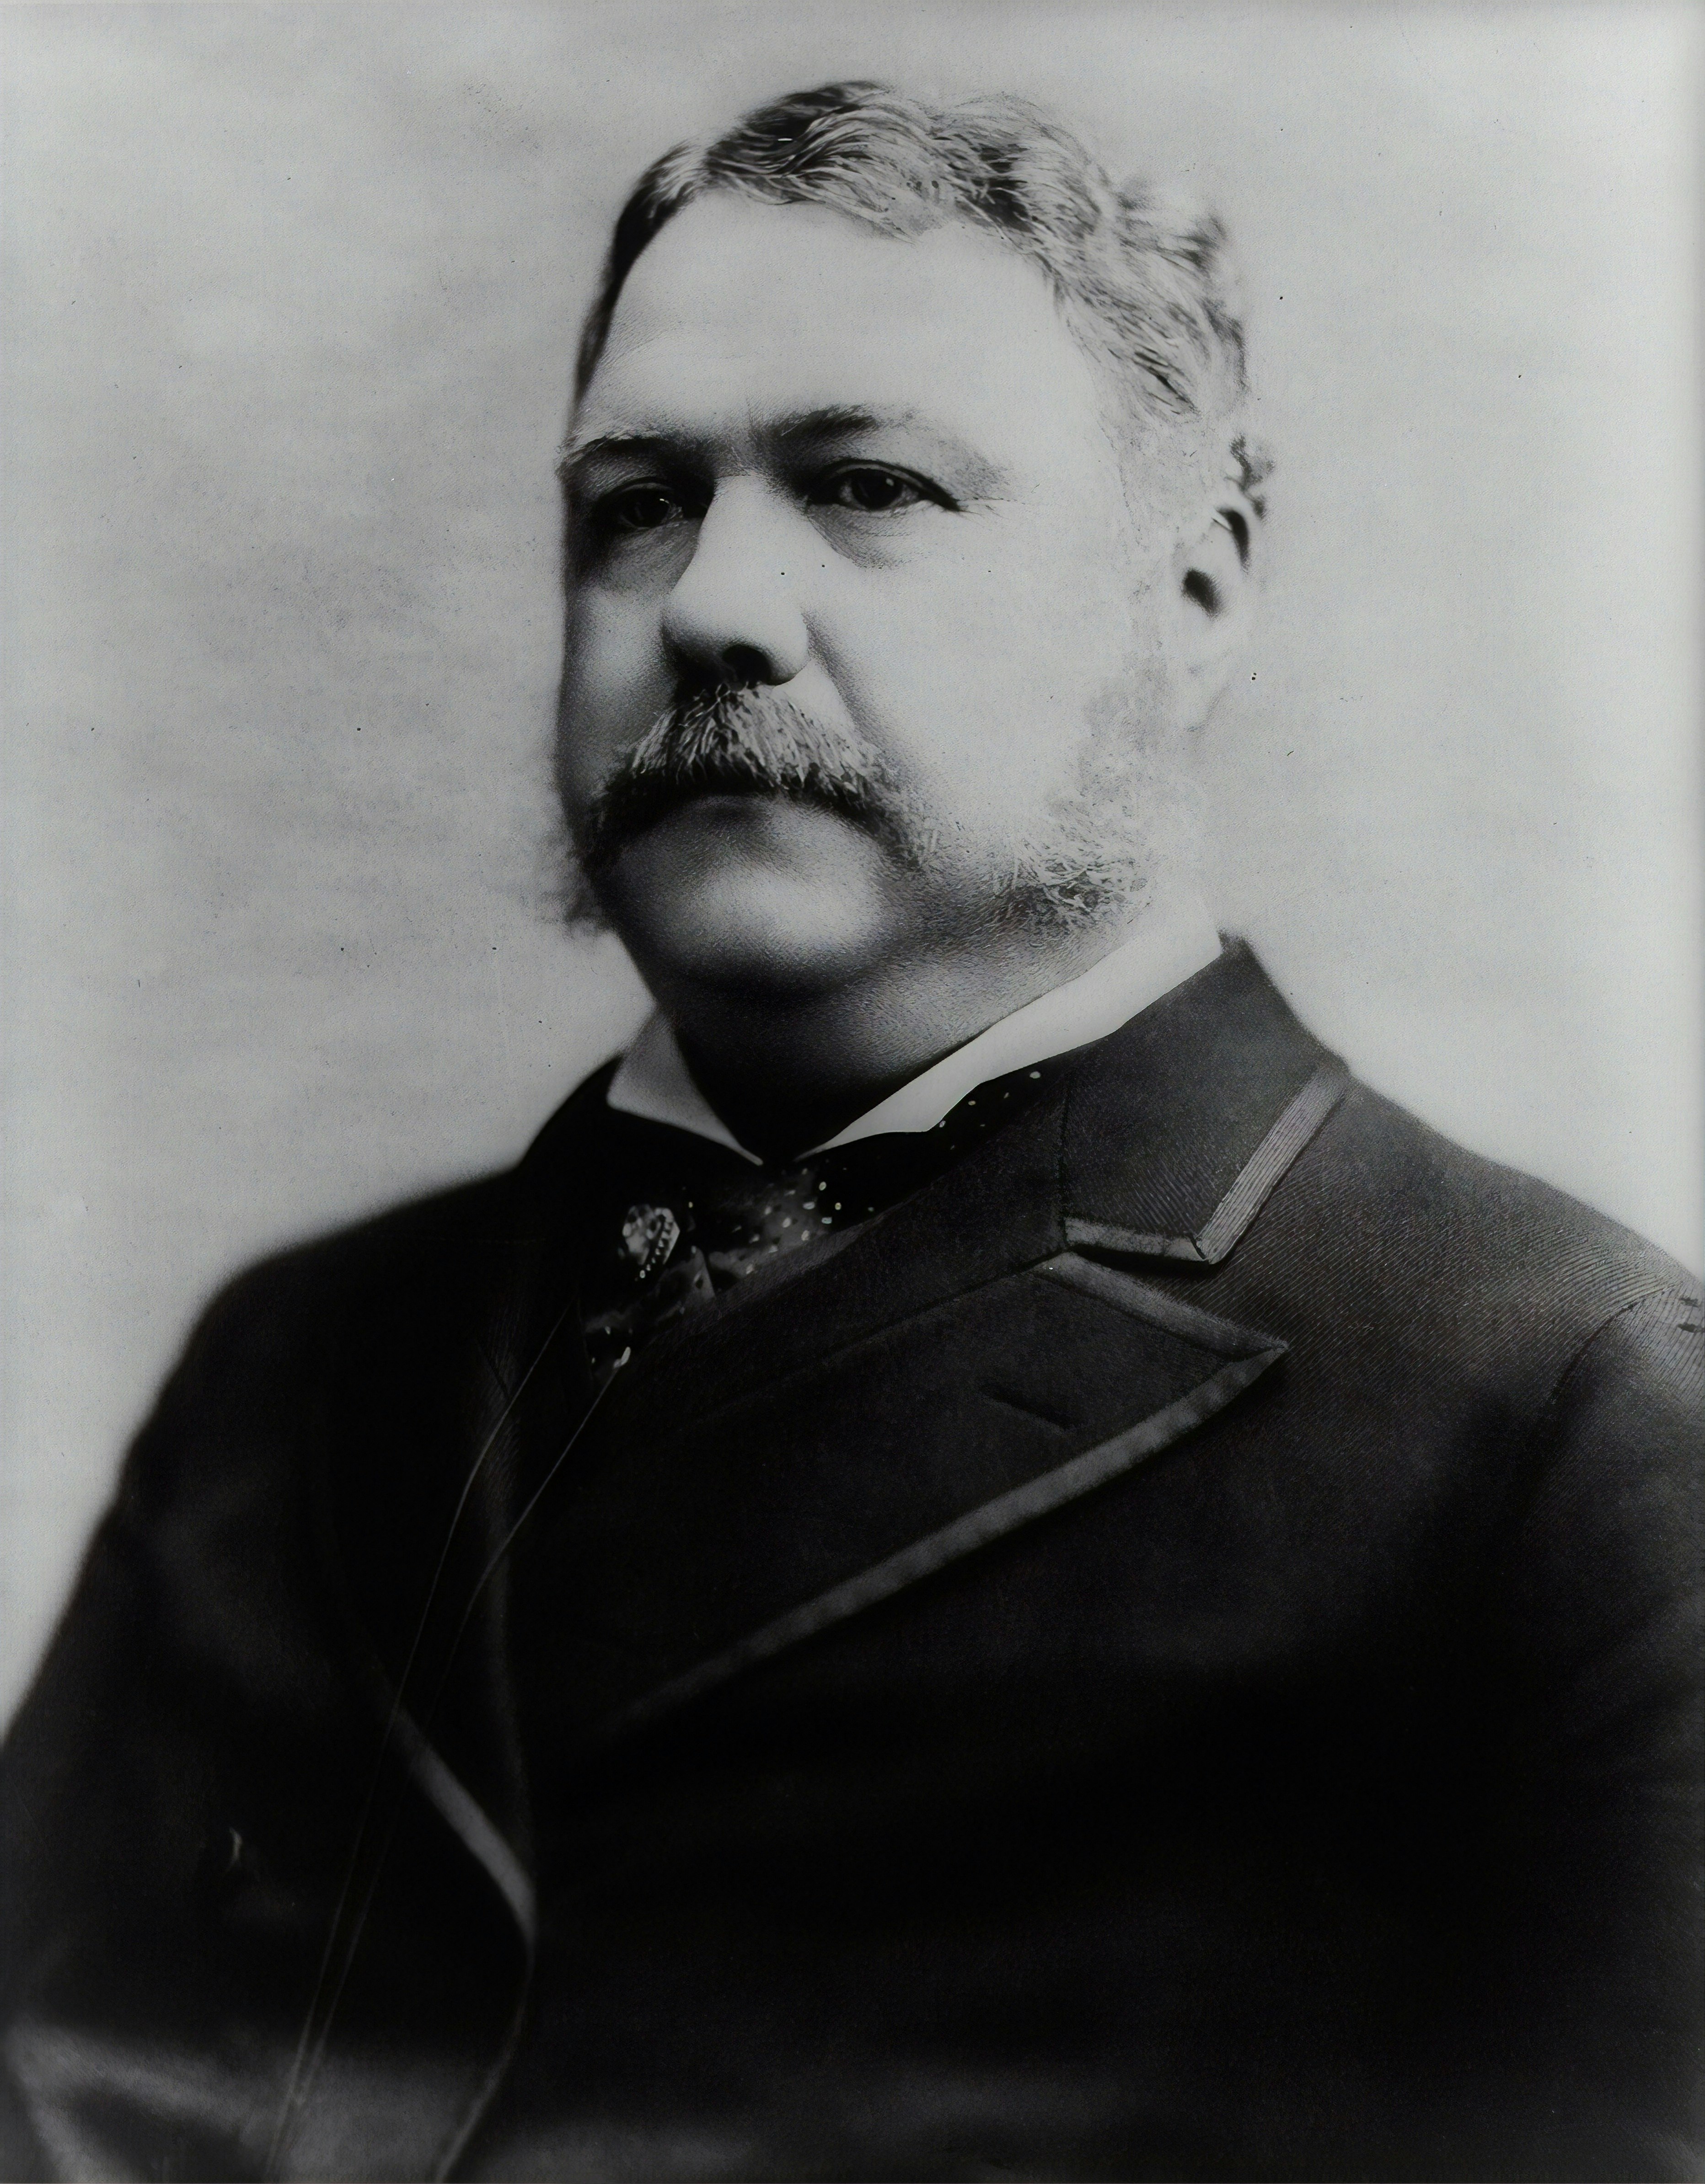 Chester A. Arthur, President of the United States. Photograph by C.M. Bell, 1882. From the Presidential File Collection. Library of Congress Prints & Photographs Division. 

https://www.loc.gov/resource/cph.3a53294/